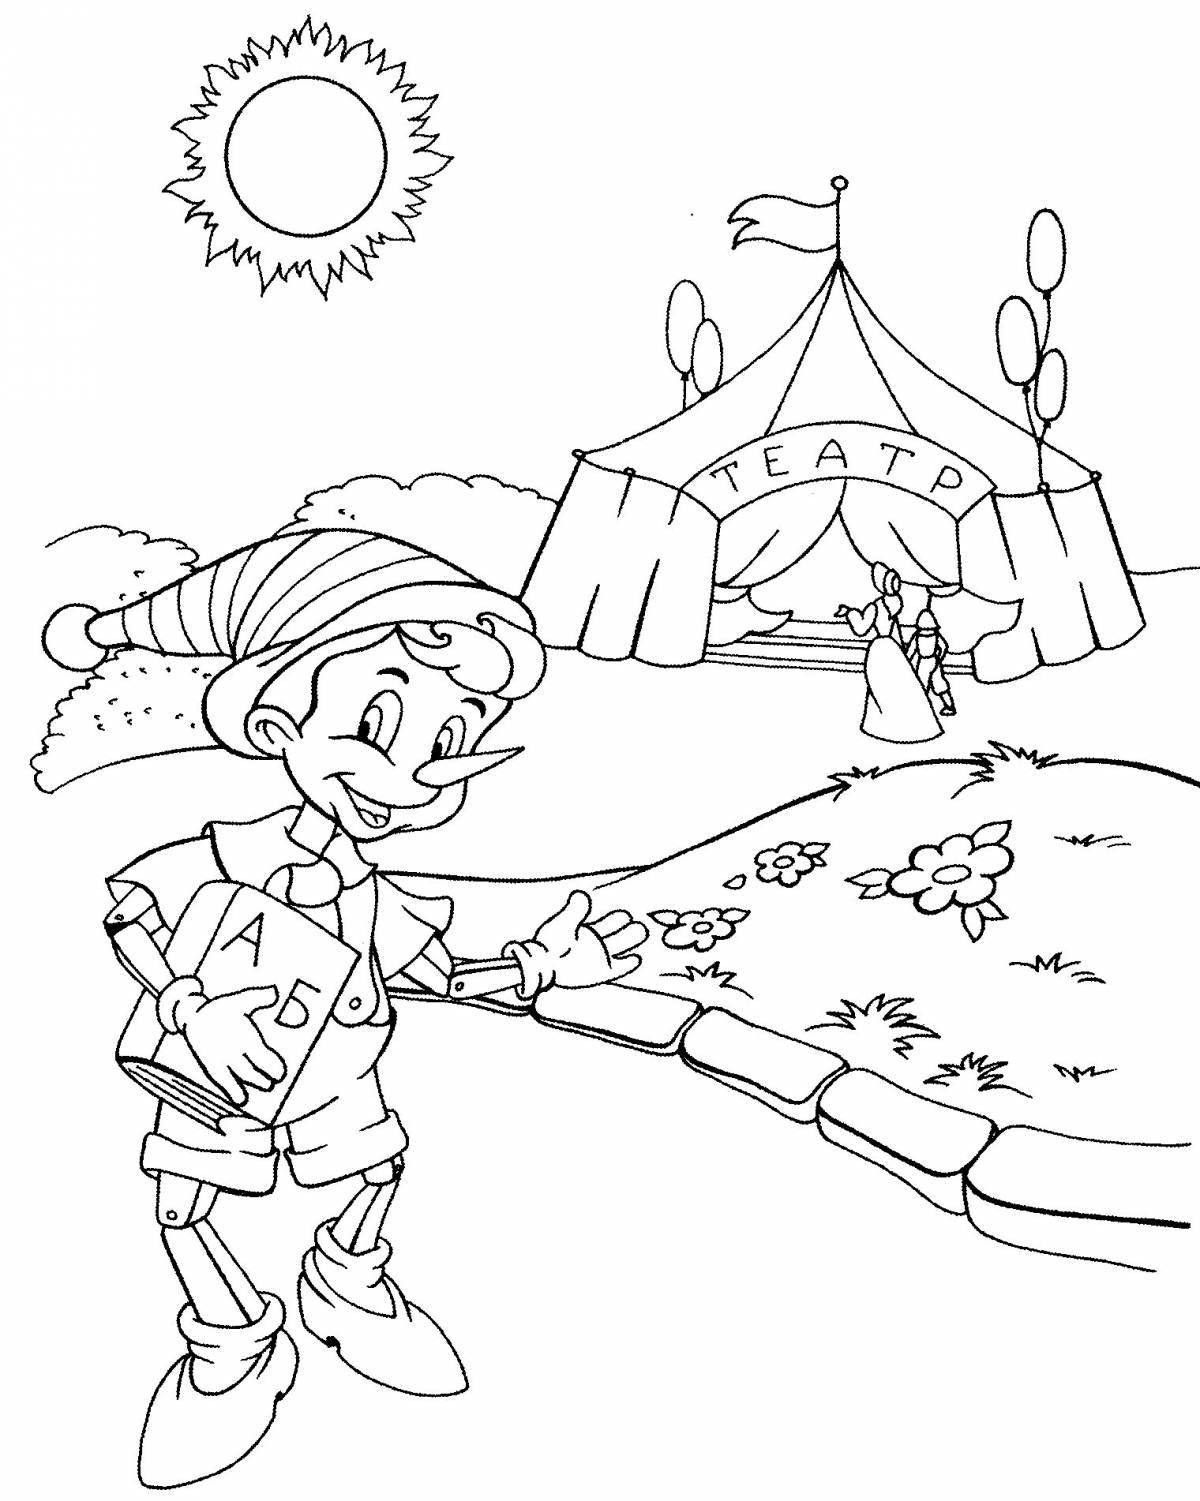 Inviting drawing of Pinocchio